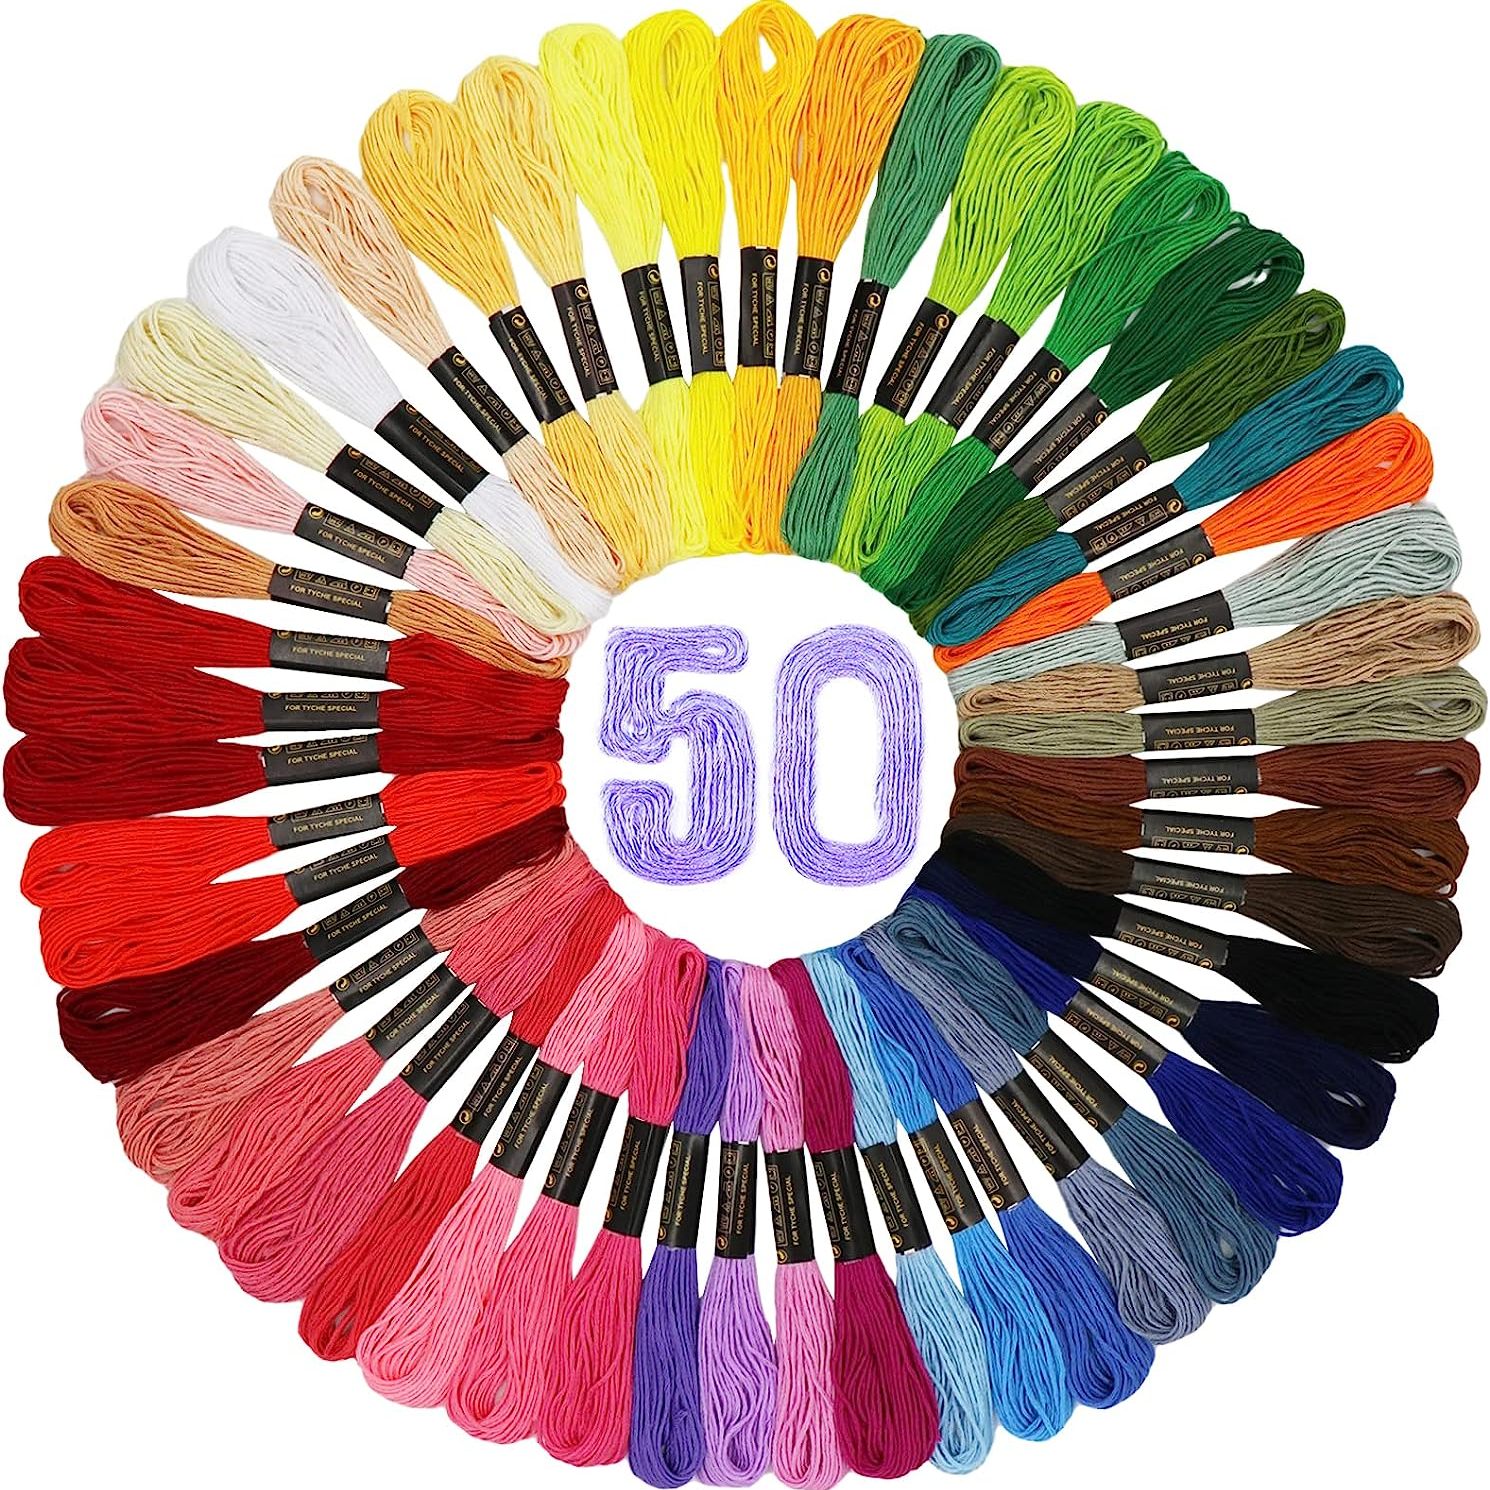 Embroidery Floss Friendship Bracelet String 150 Skeins Multi-Color Cross  Stitch Thread with Color Numbers,6 Strand Floss